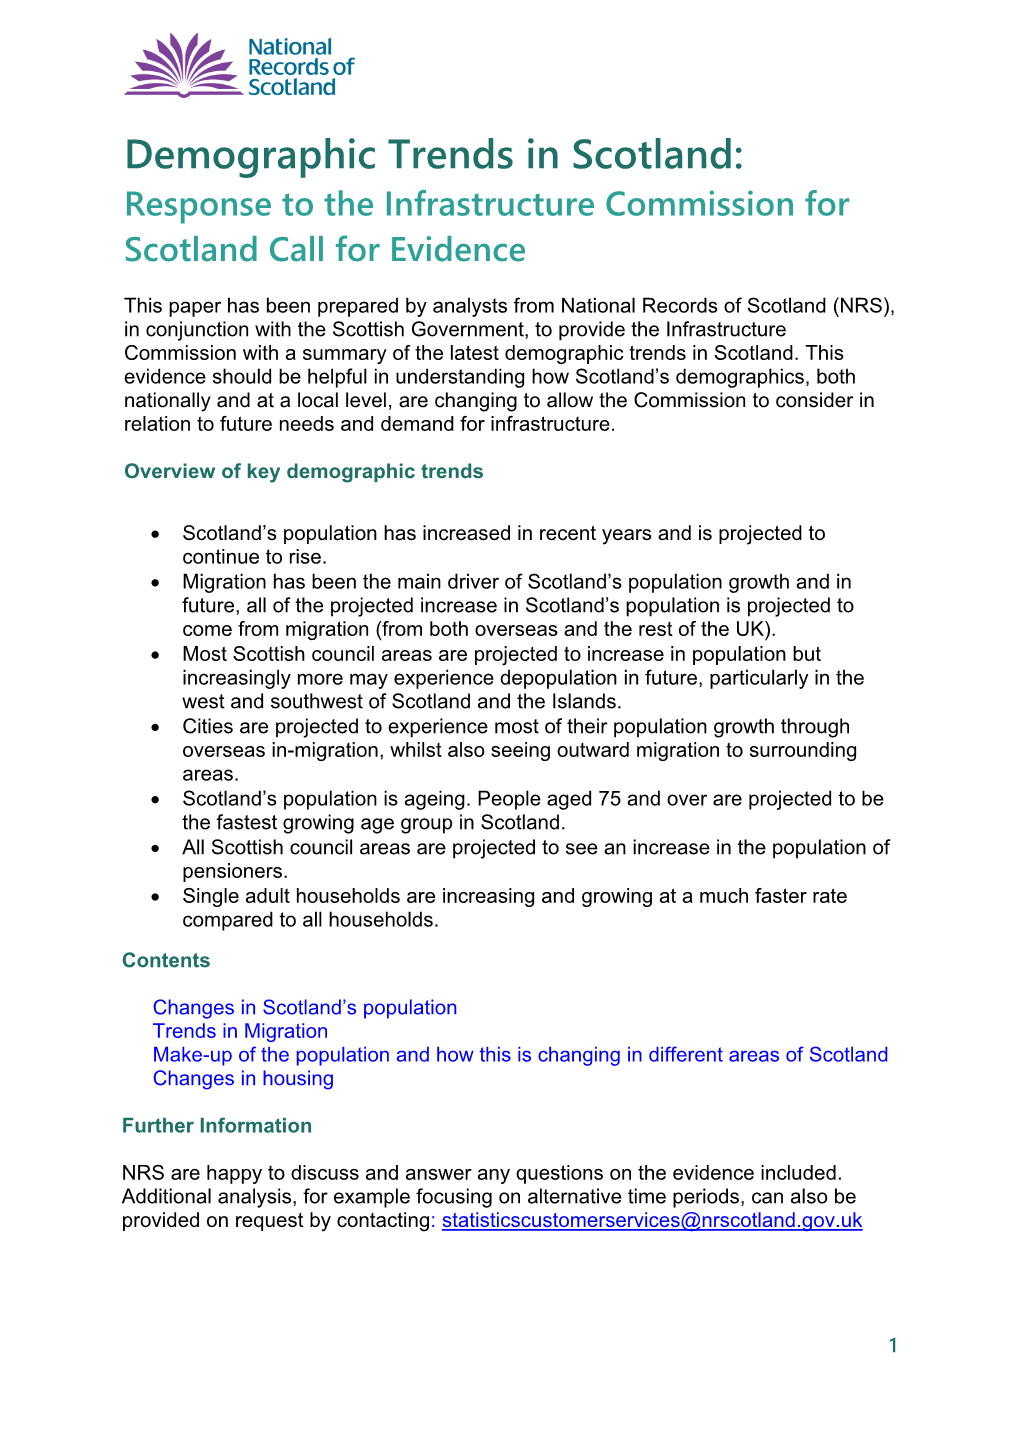 Demographic Trends in Scotland: Response to the Infrastructure Commission for Scotland Call for Evidence